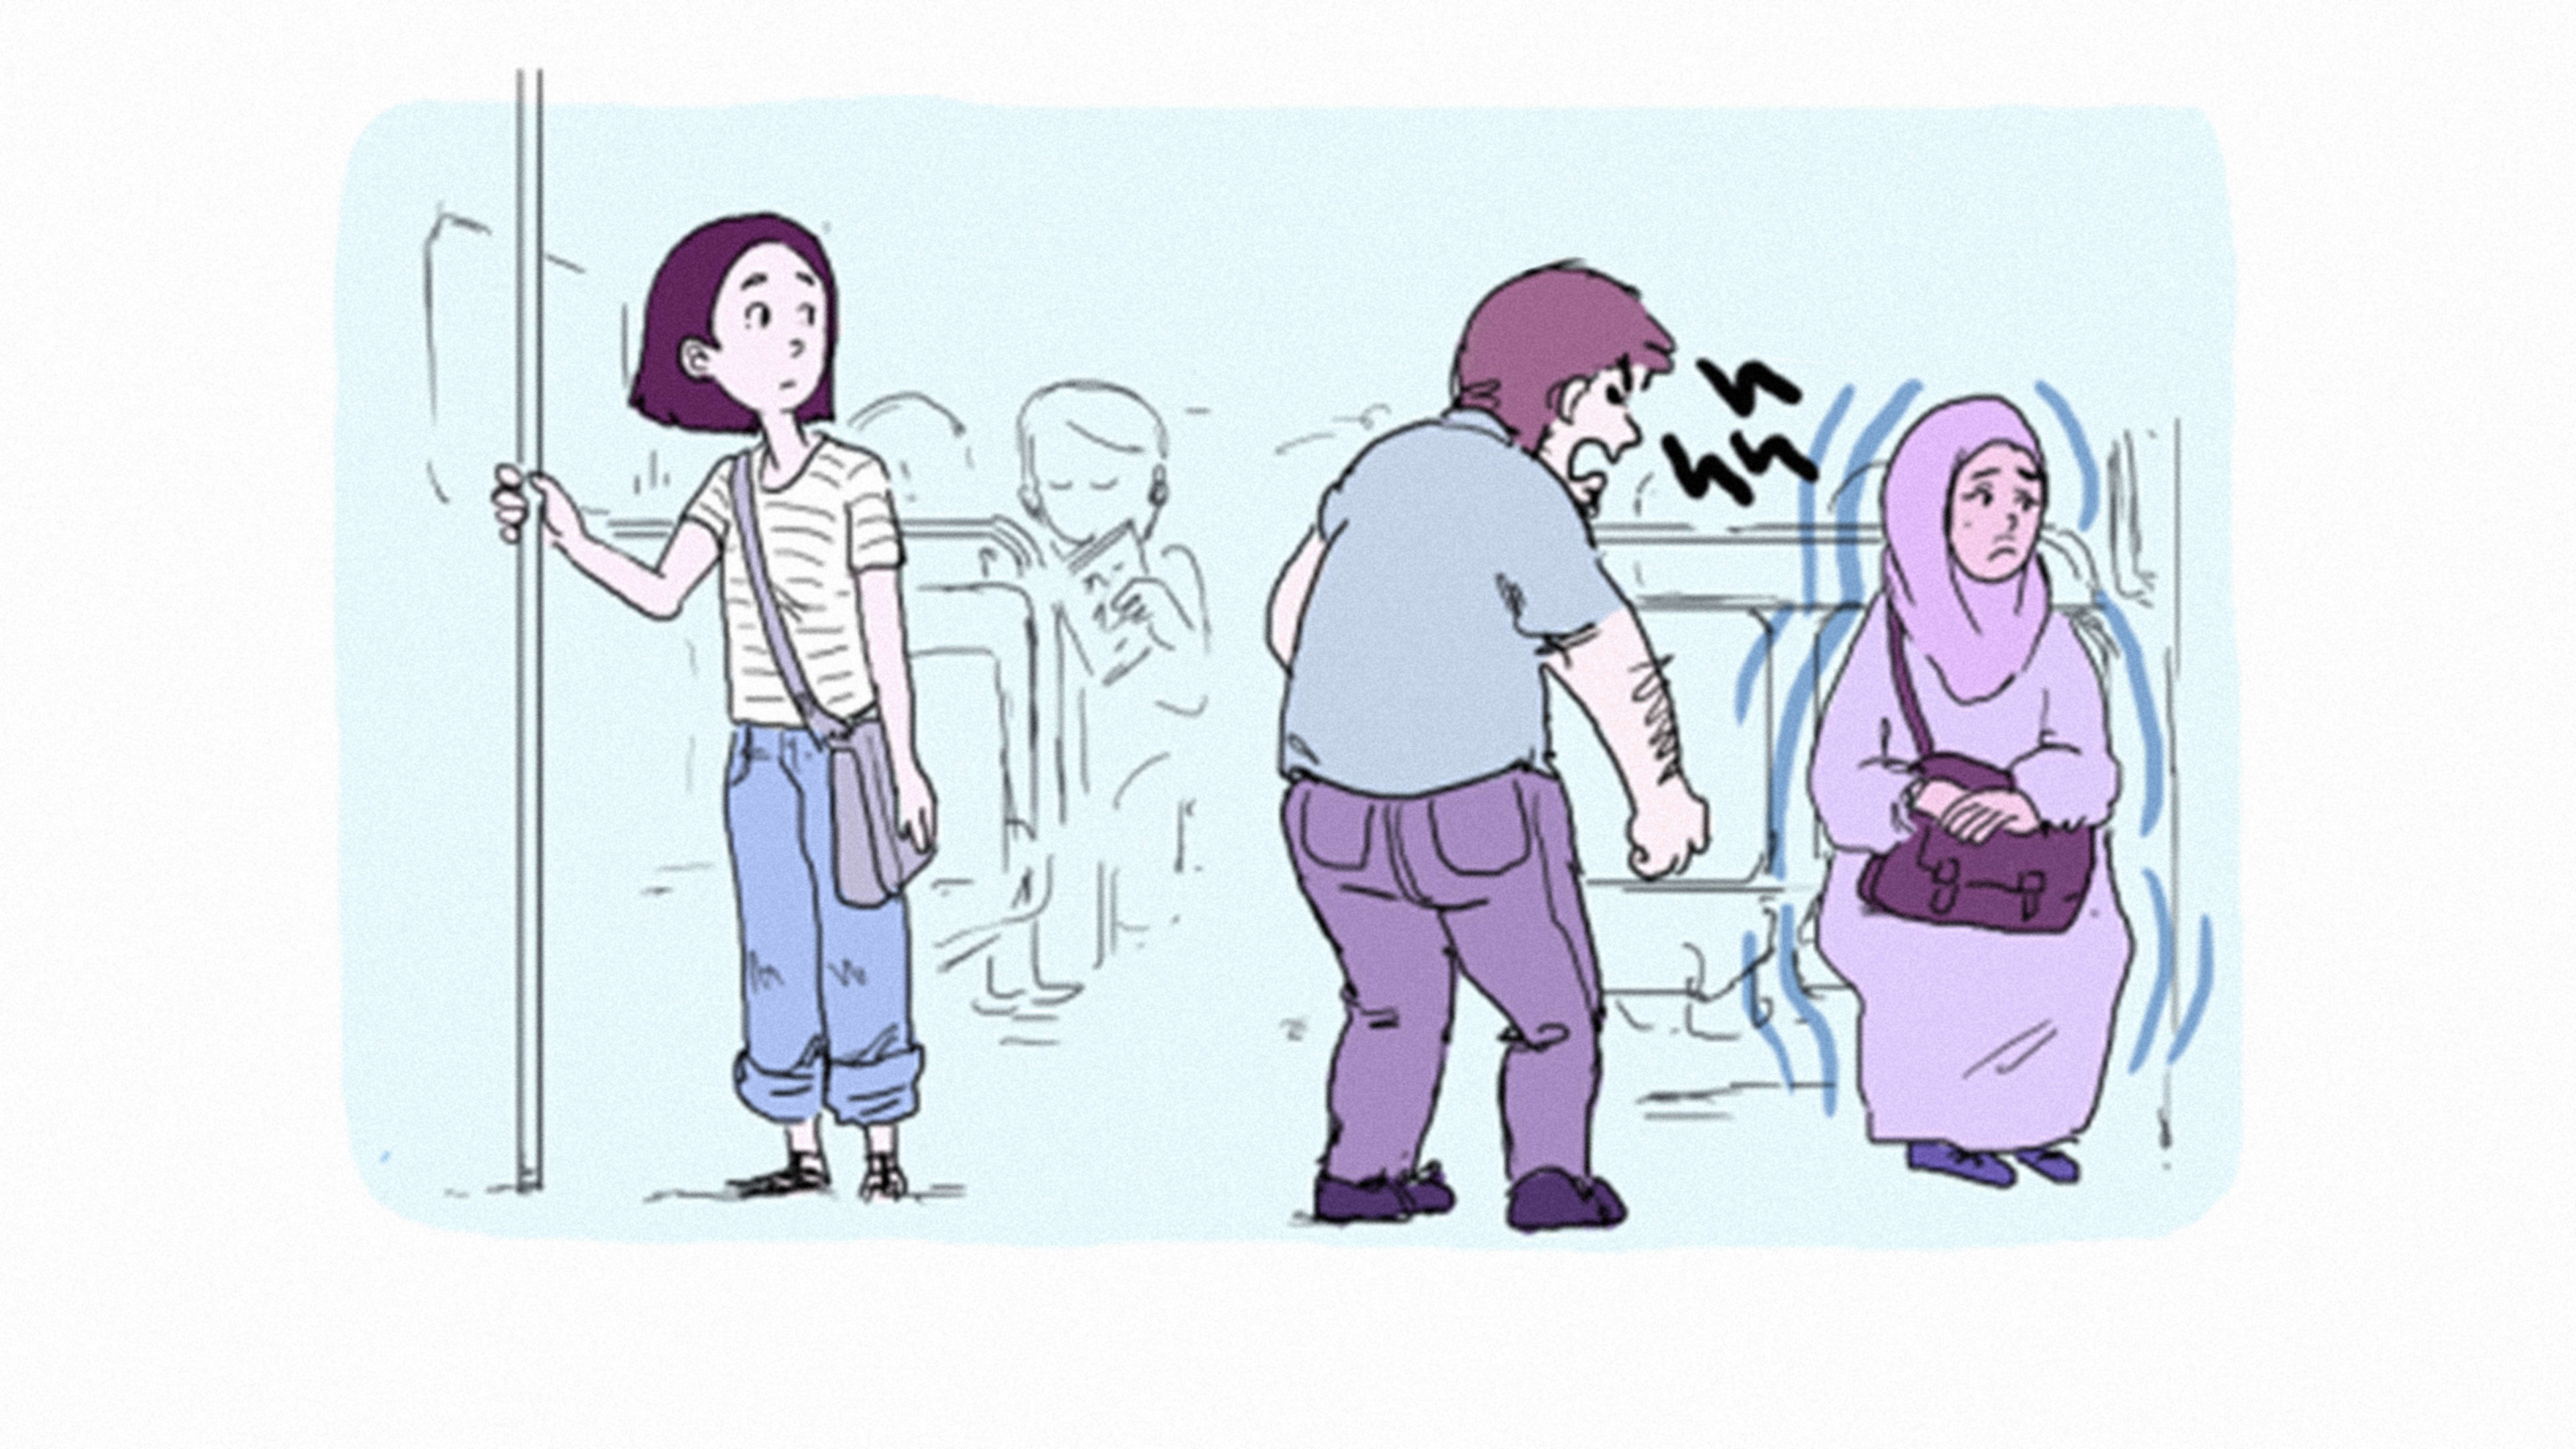 These Posters Explain How To Help Stop Islamophobic Attacks In Public